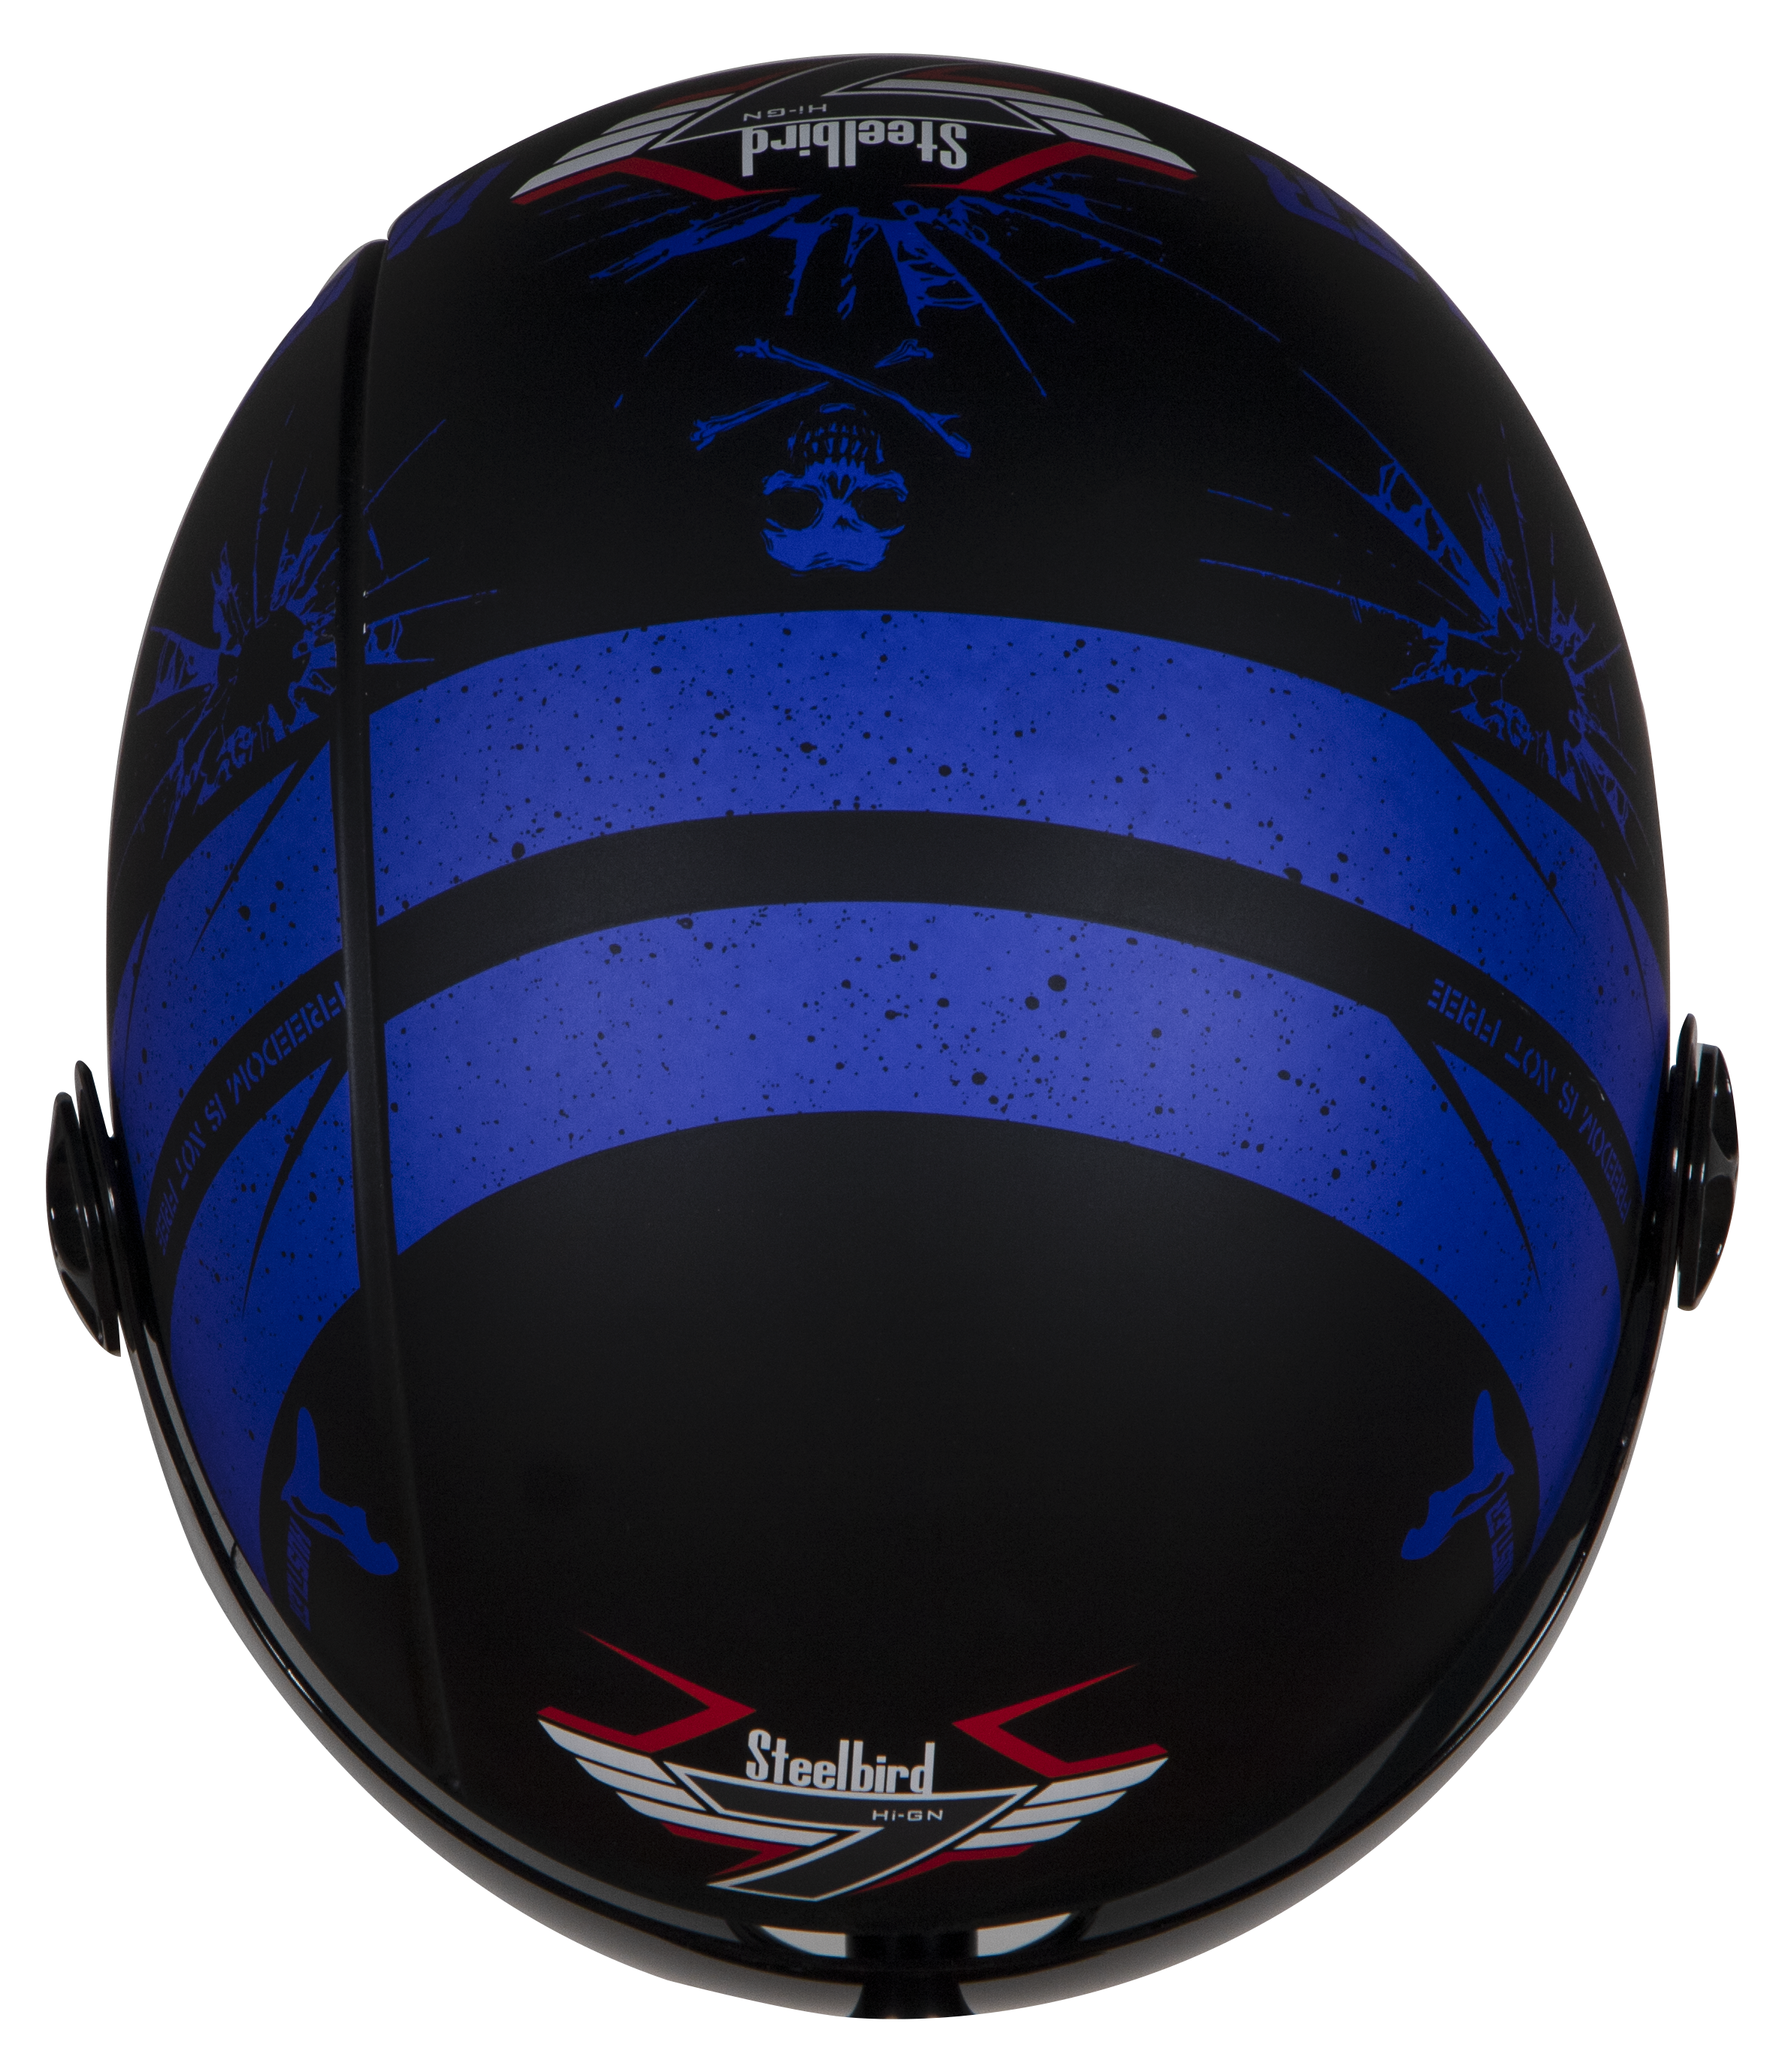 SBH-16 Hustler Mat Black With Blue( Fitted With Clear Visor Extra Smoke Visor Free)